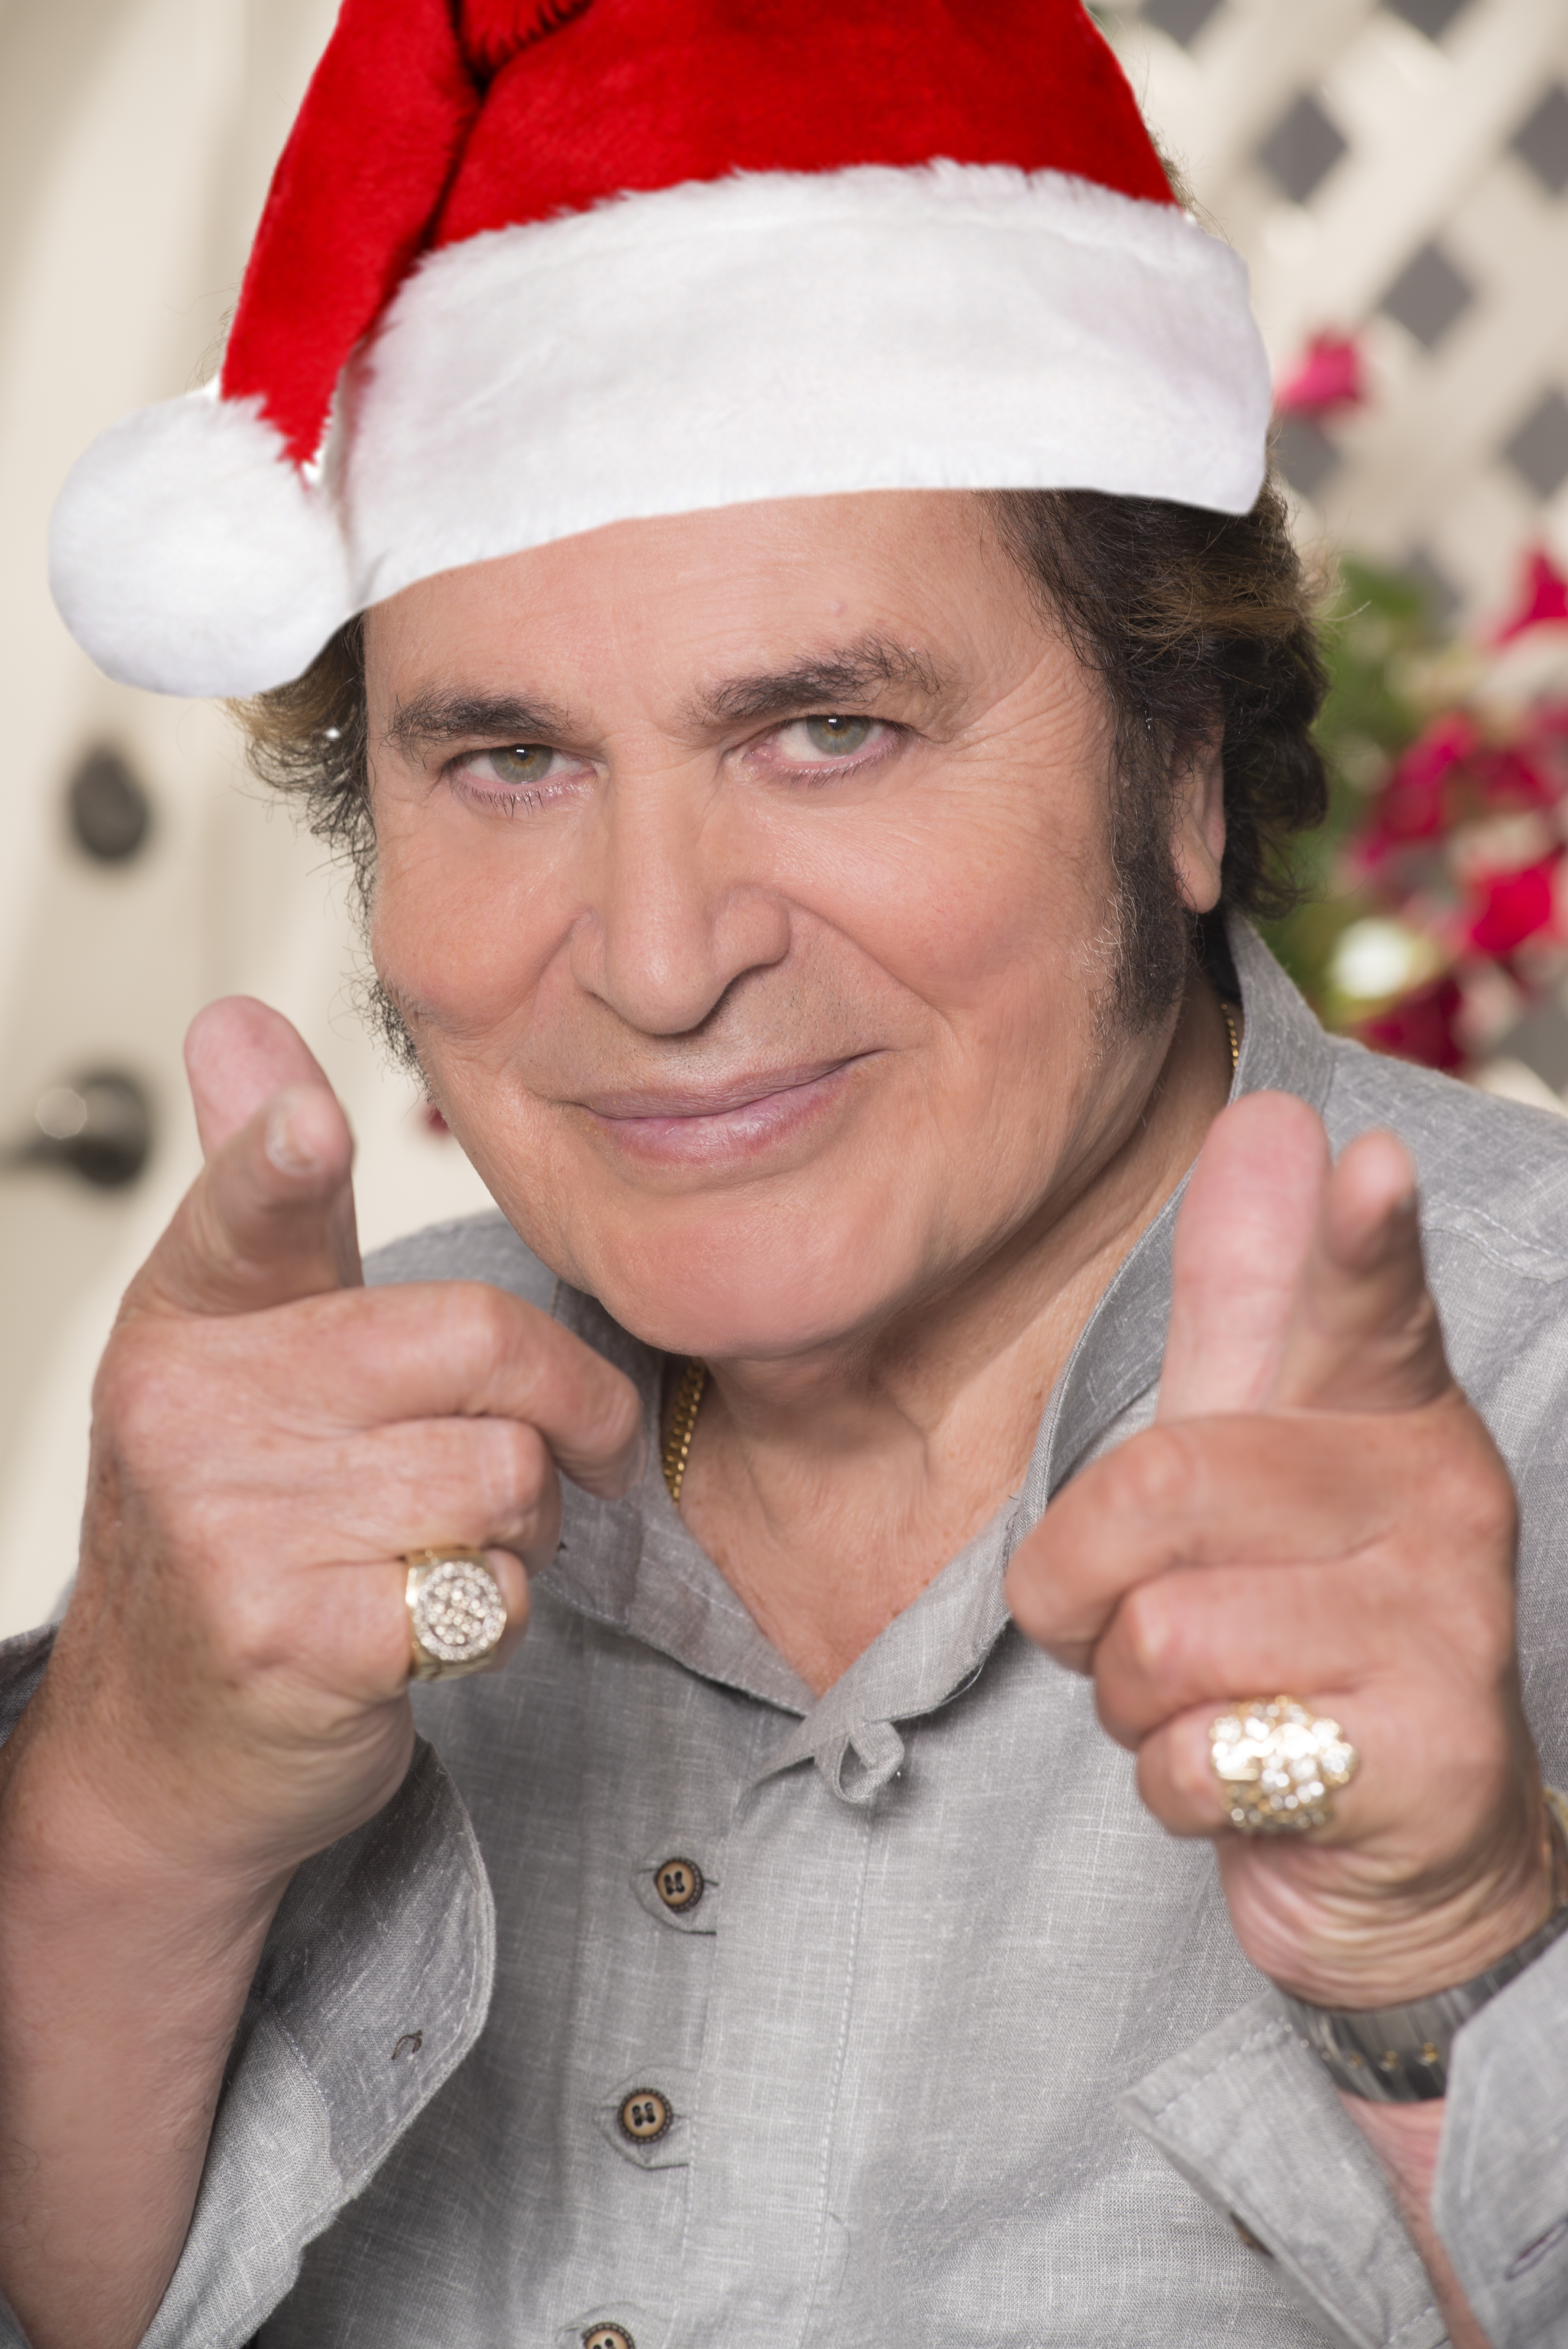 12 Days of Humperdinck - Day 5 “Just Like the First Time” and “Songs of Love”